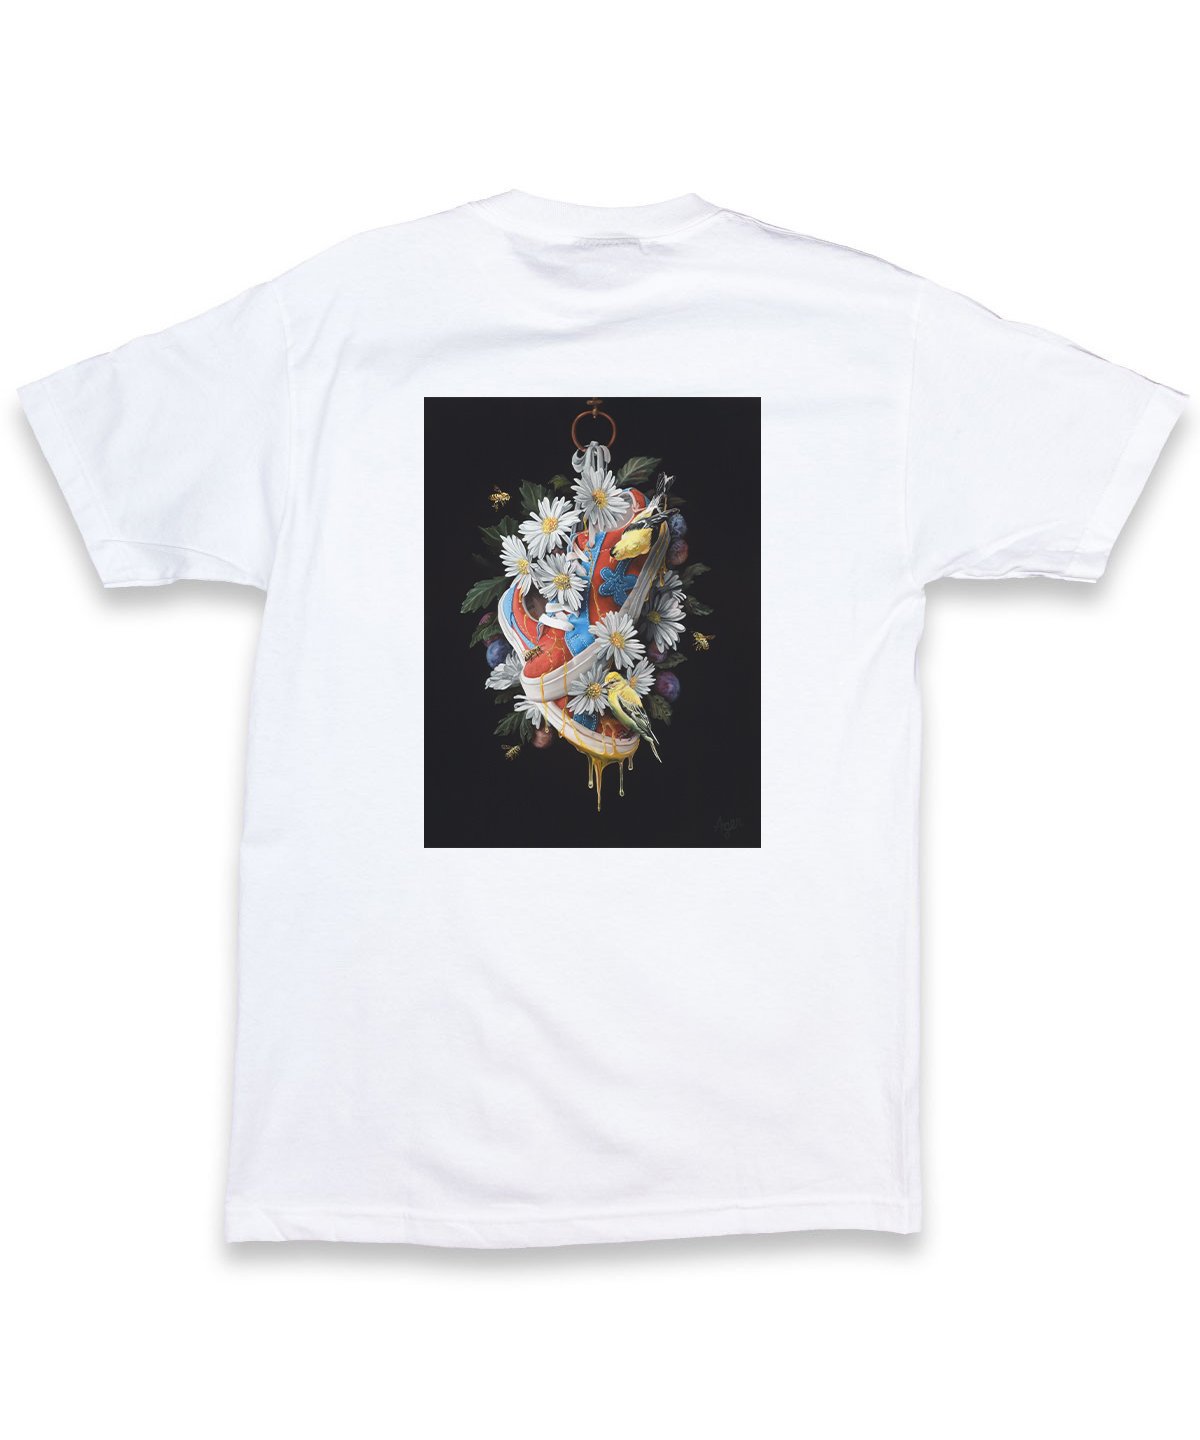 Image of "THE BIRDS AND THE BEES" Short Sleeve T-Shirt